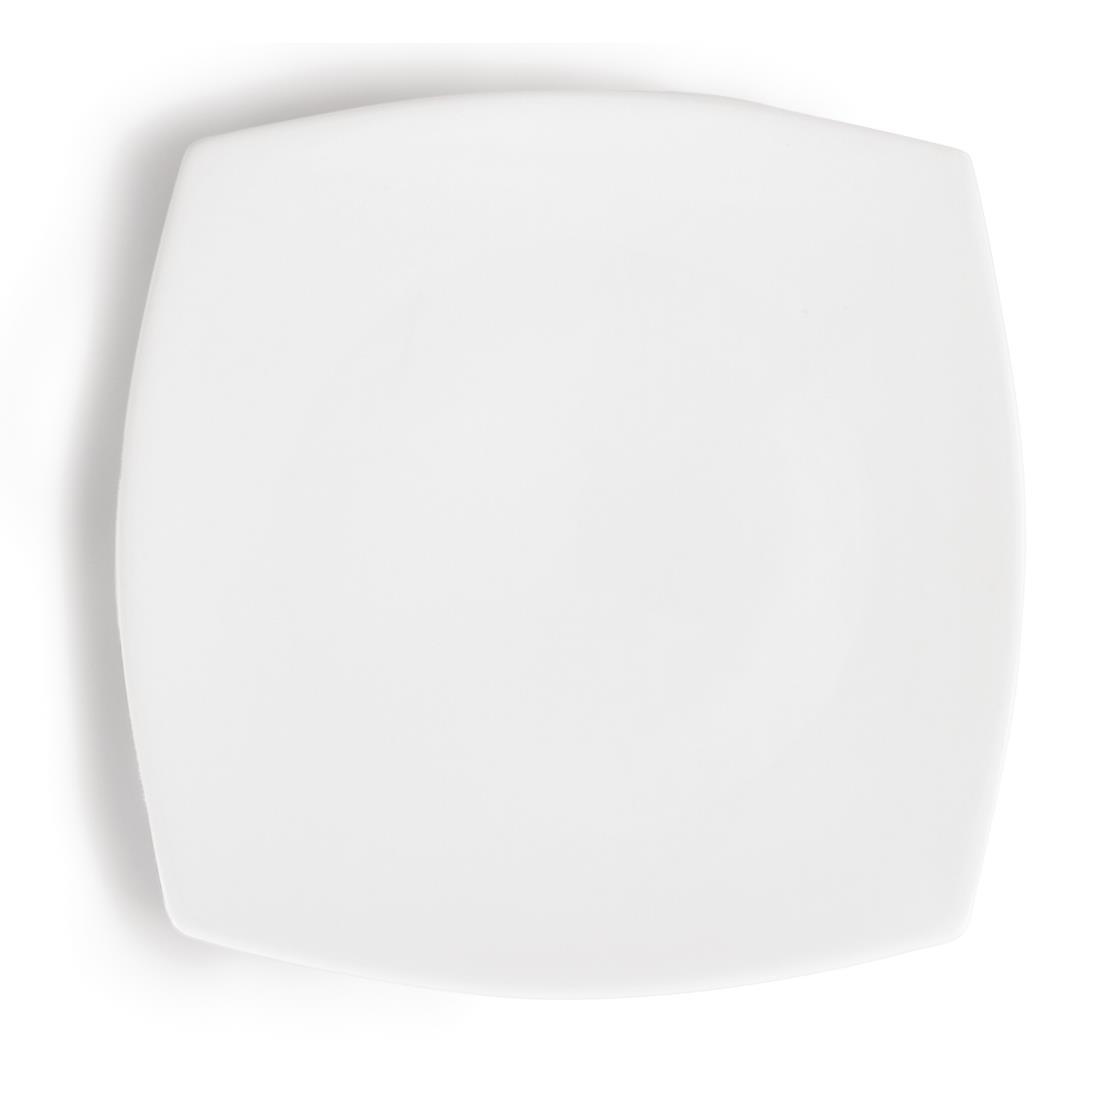 Olympia Whiteware Rounded Square Plates 270mm (Pack of 6) - CB493  - 4